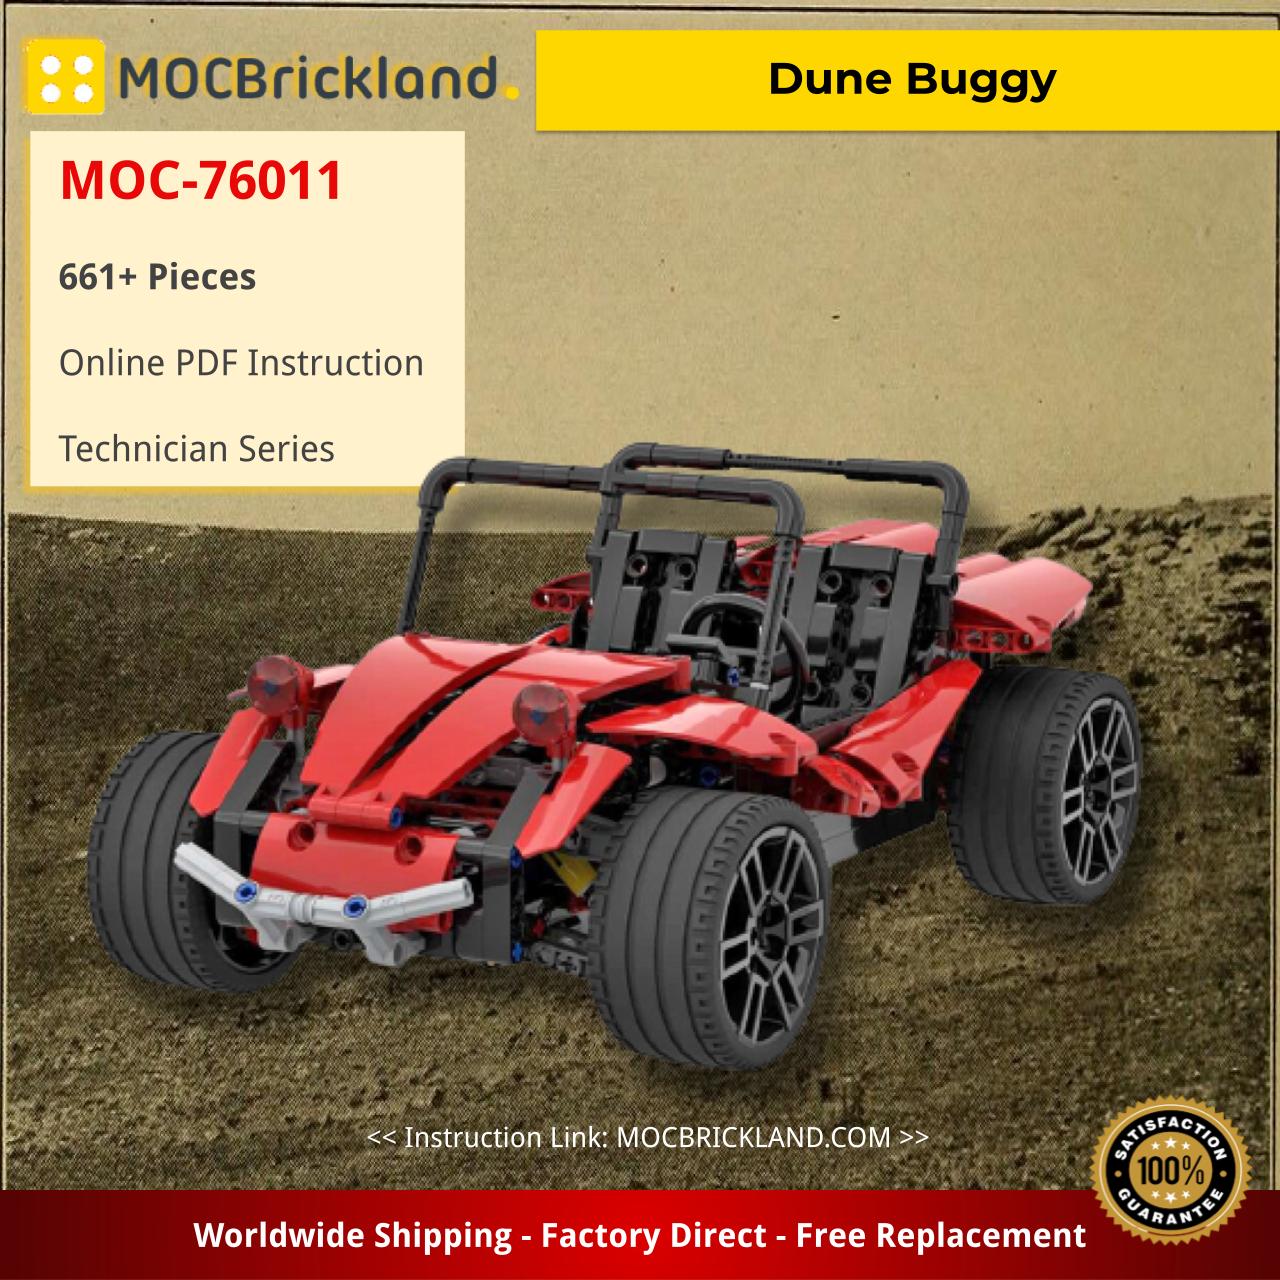 Dune Buggy MOC-76011 paave with pieces MOC Brick Land